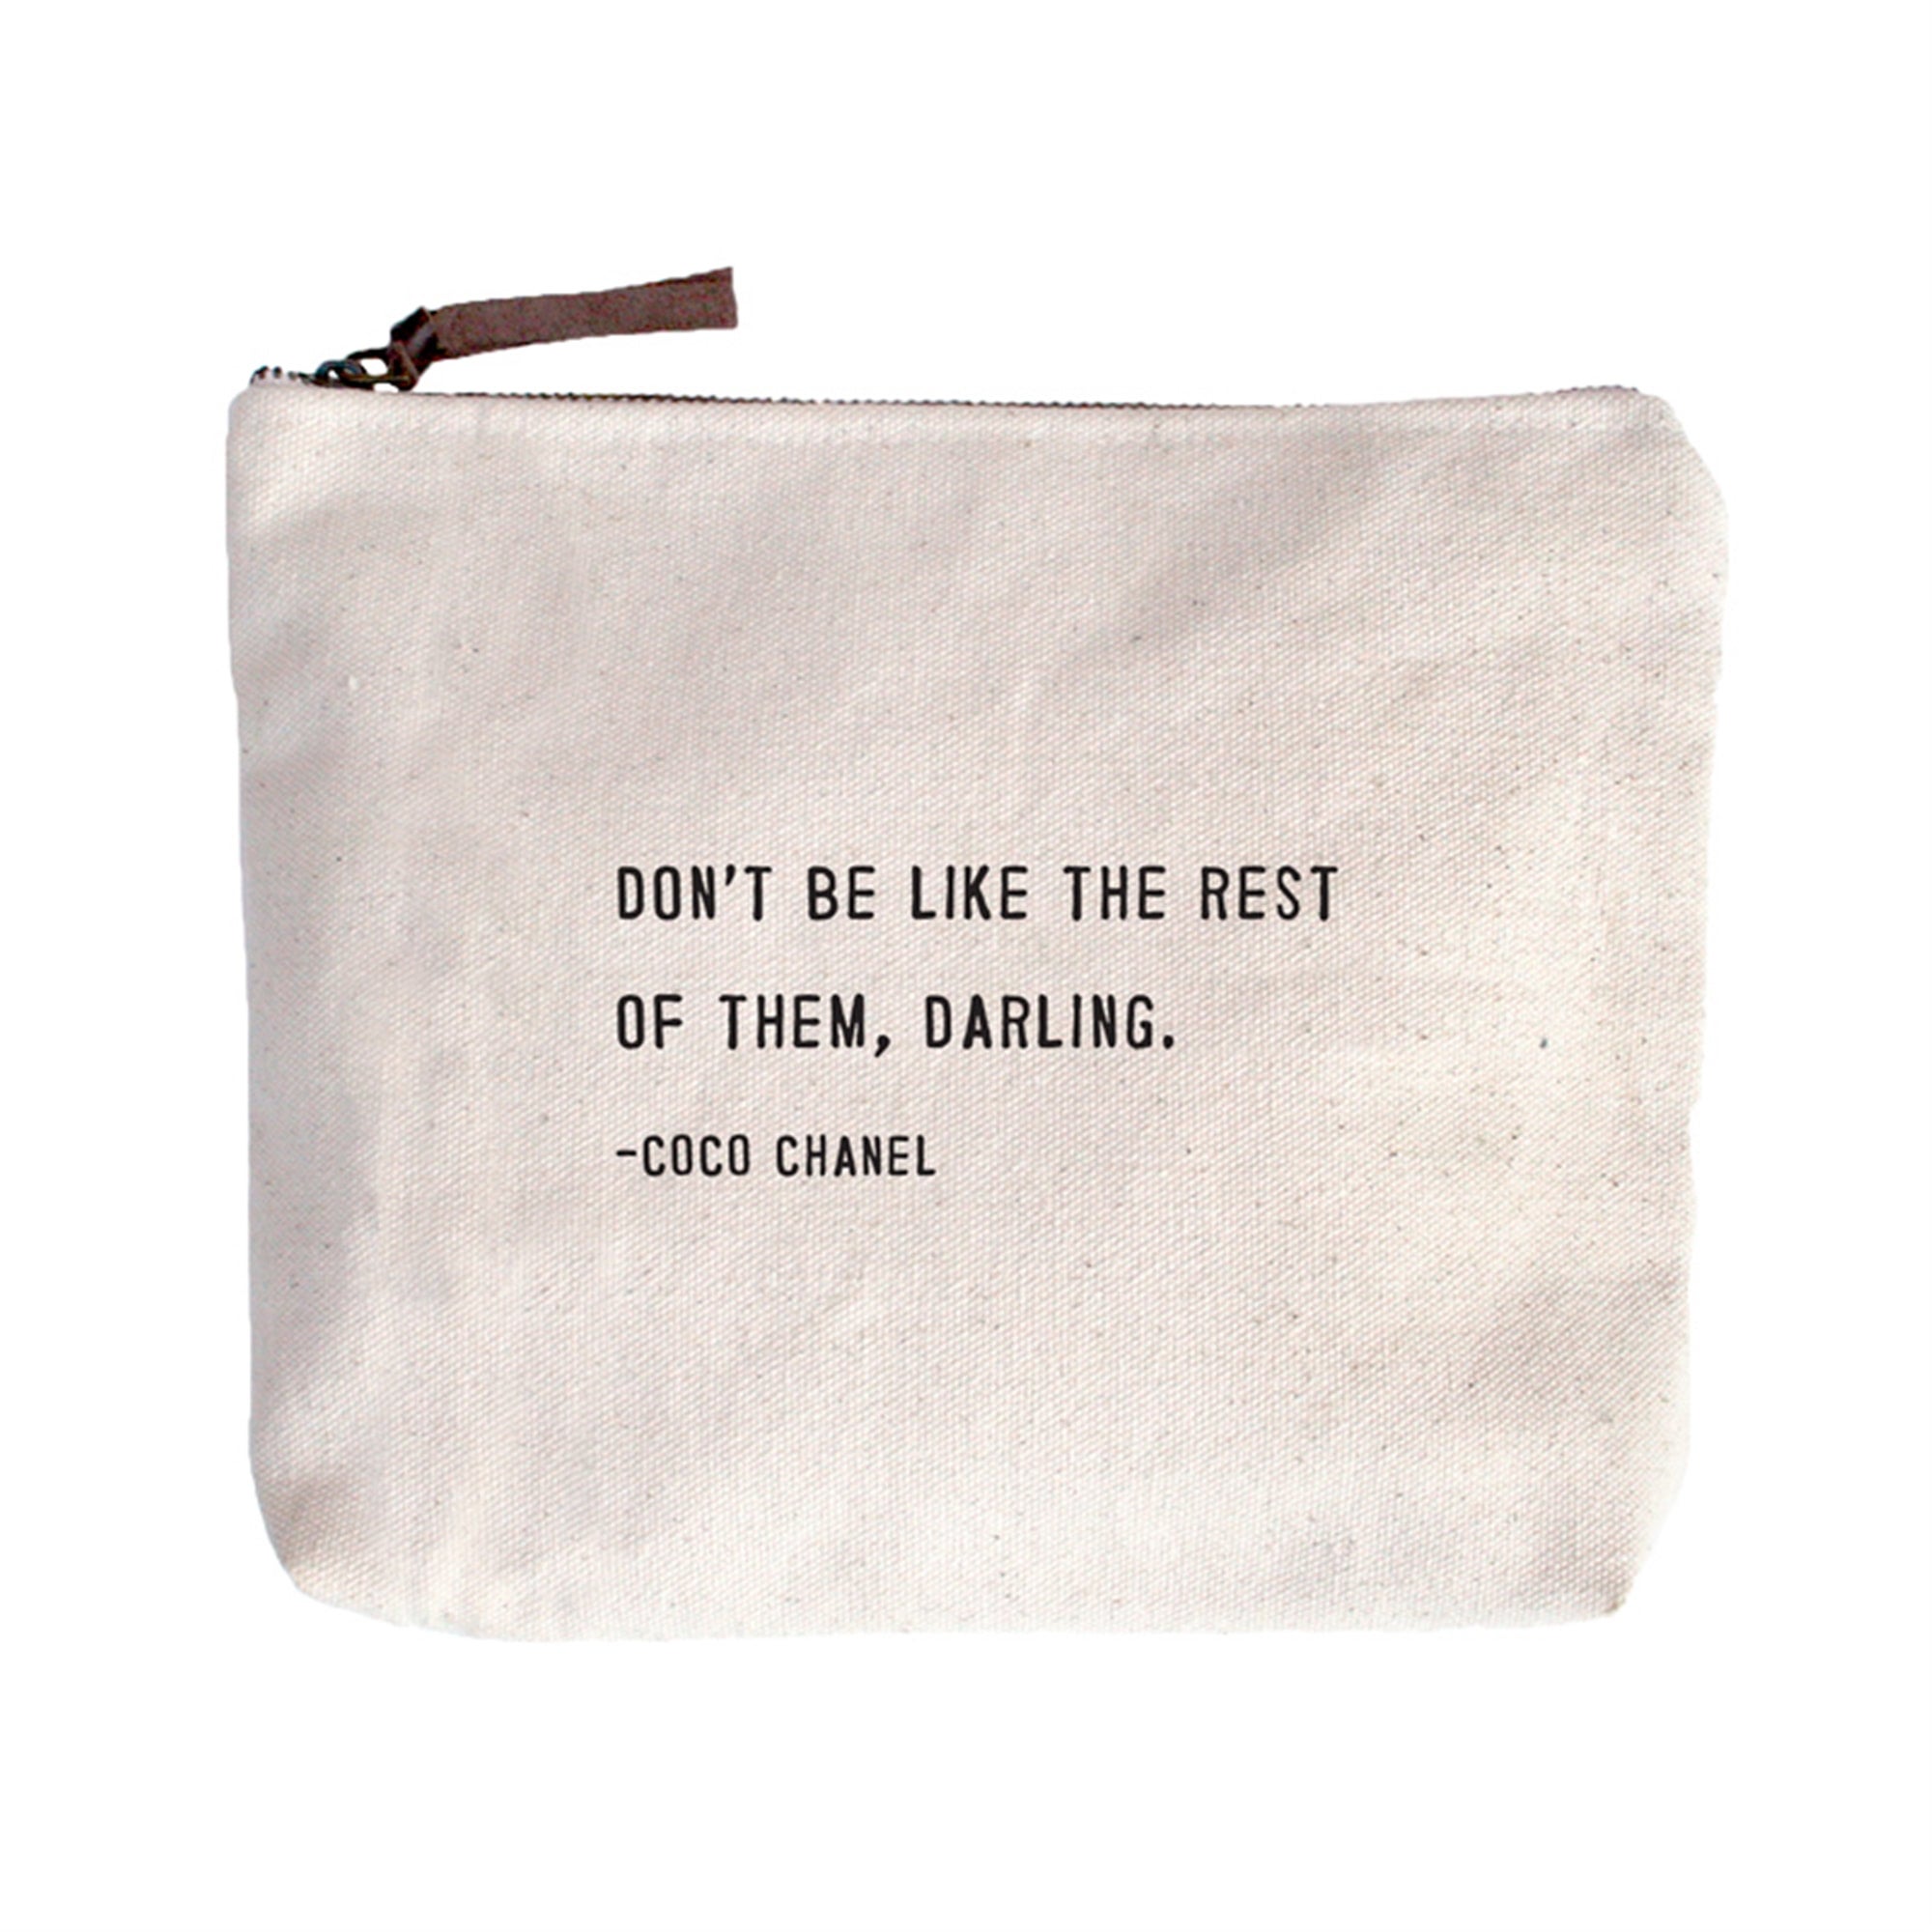 Coco Chanel (Don't Be Like The Rest Of Them) Canvas Zip Bag - 8.5